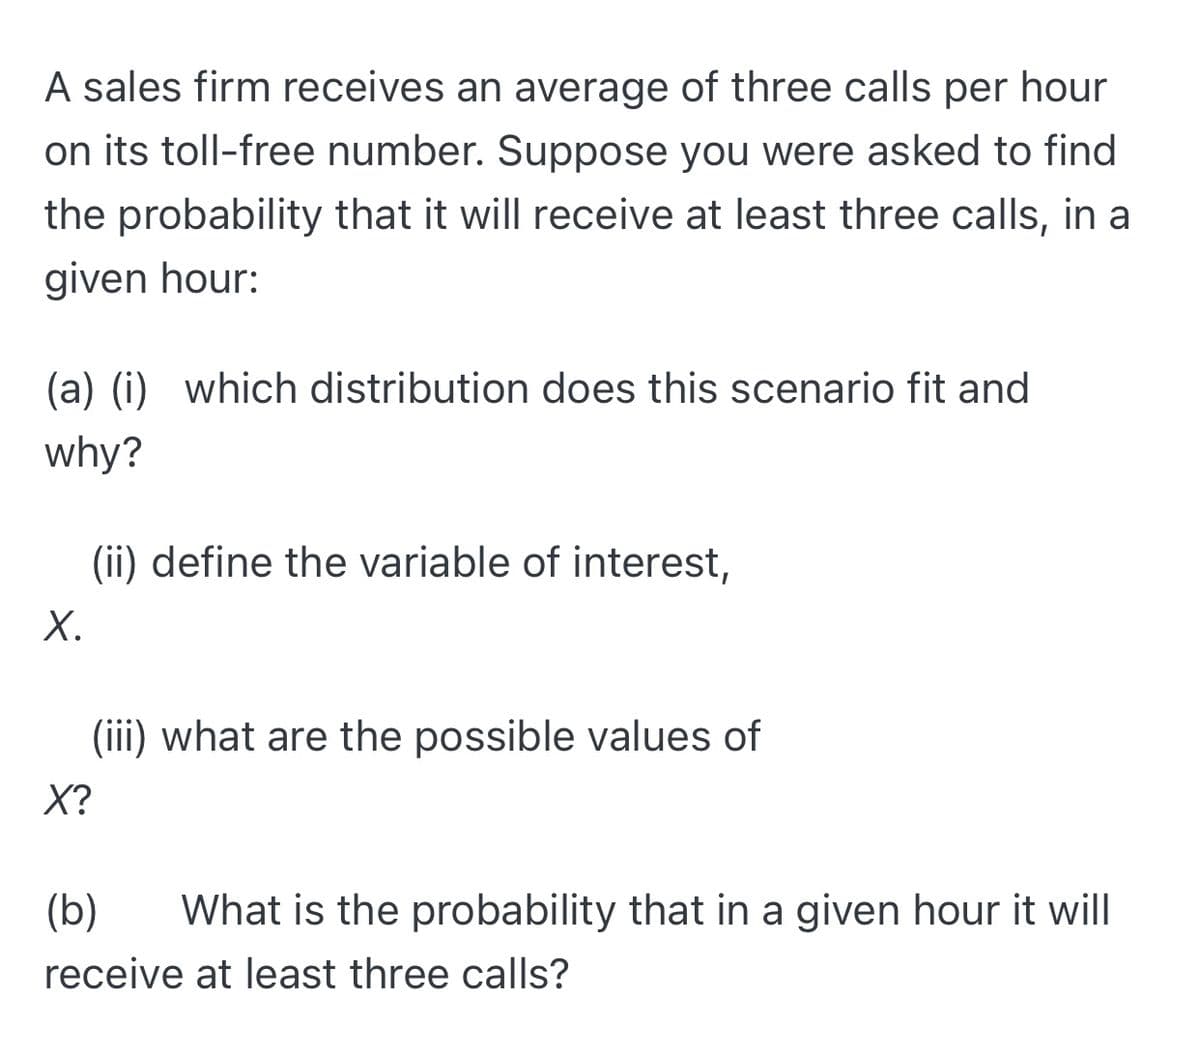 A sales firm receives an average of three calls per hour
on its toll-free number. Suppose you were asked to find
the probability that it will receive at least three calls, in a
given hour:
(a) (i) which distribution does this scenario fit and
why?
(ii) define the variable of interest,
Х.
(iii) what are the possible values of
X?
(b)
What is the probability that in a given hour it will
receive at least three calls?
